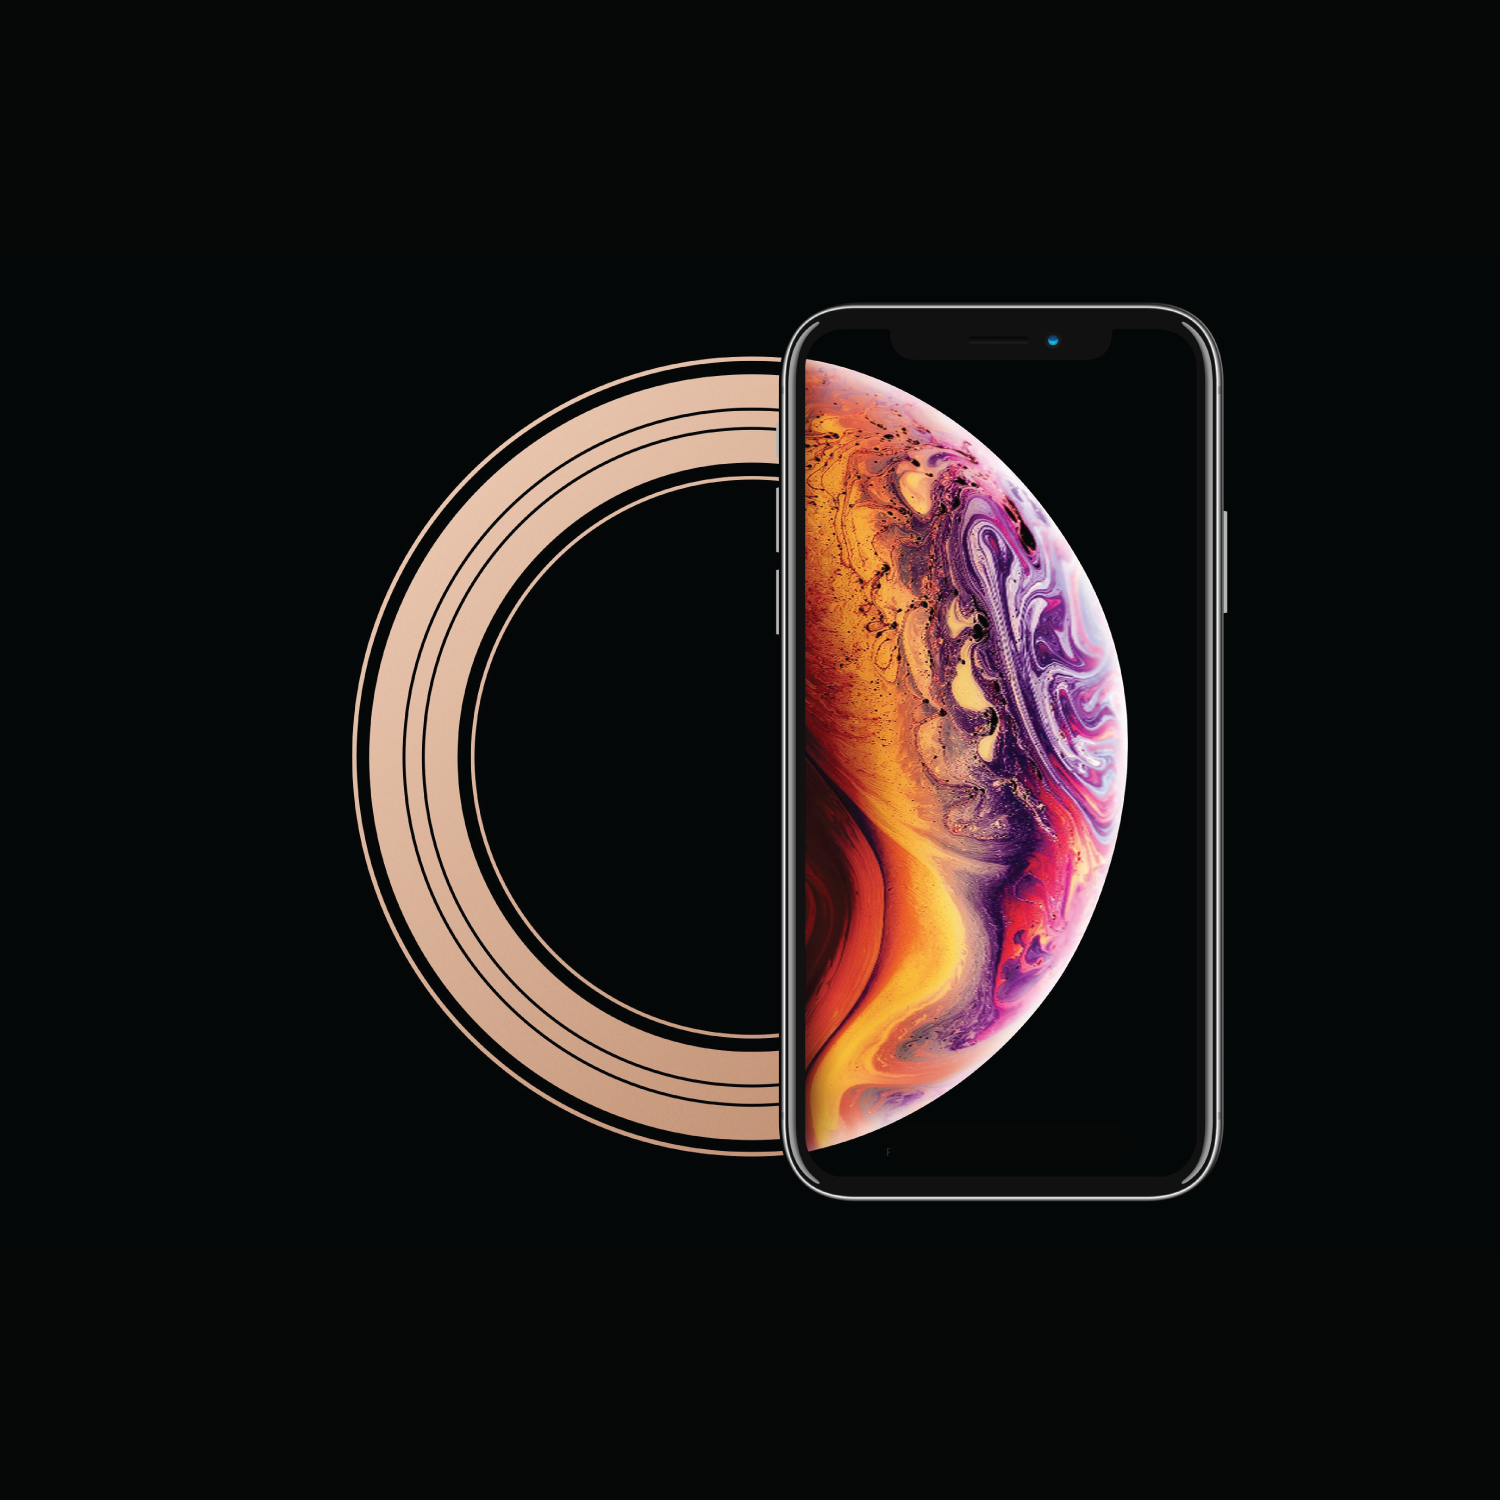 Get the specs iphone xs iphone xs max iphone xr â